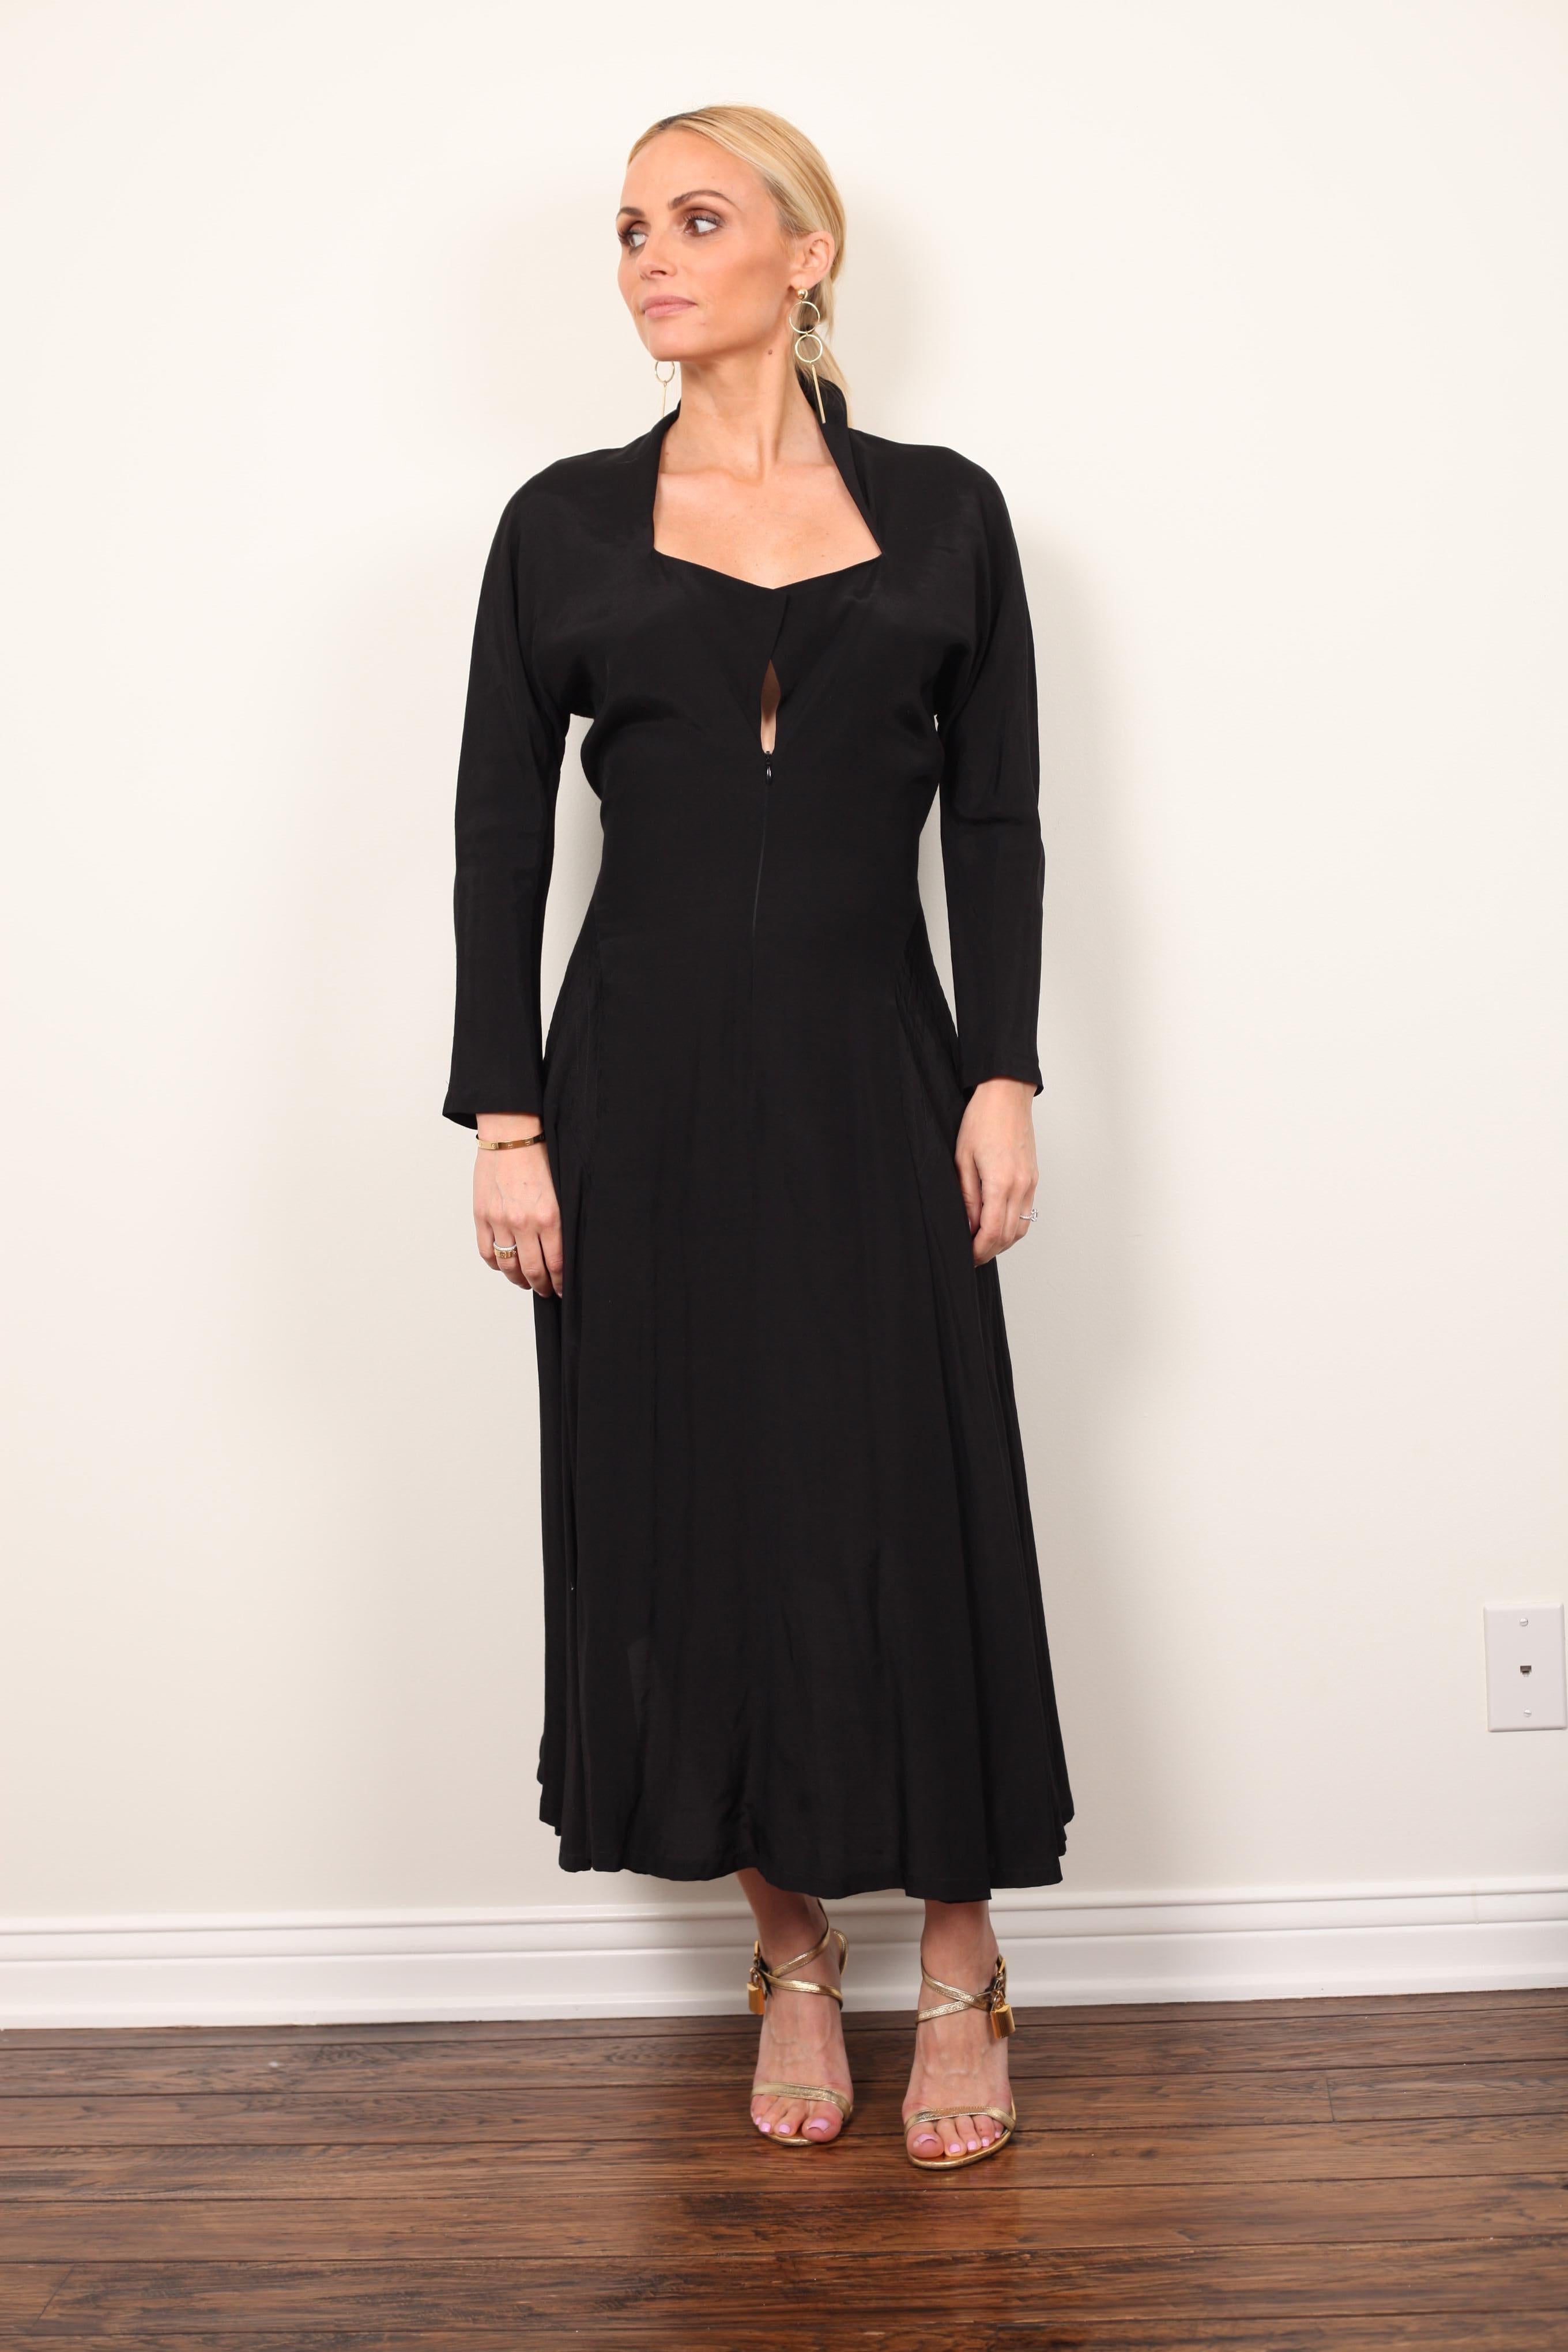 Pristine Yohji Yamamoto Black Dress with two different wearing / styling options. 
Tags still attached, 100% Rayon and zipper detail for the chest to wear two different ways. 
Ankle length and skirt is flowy. 